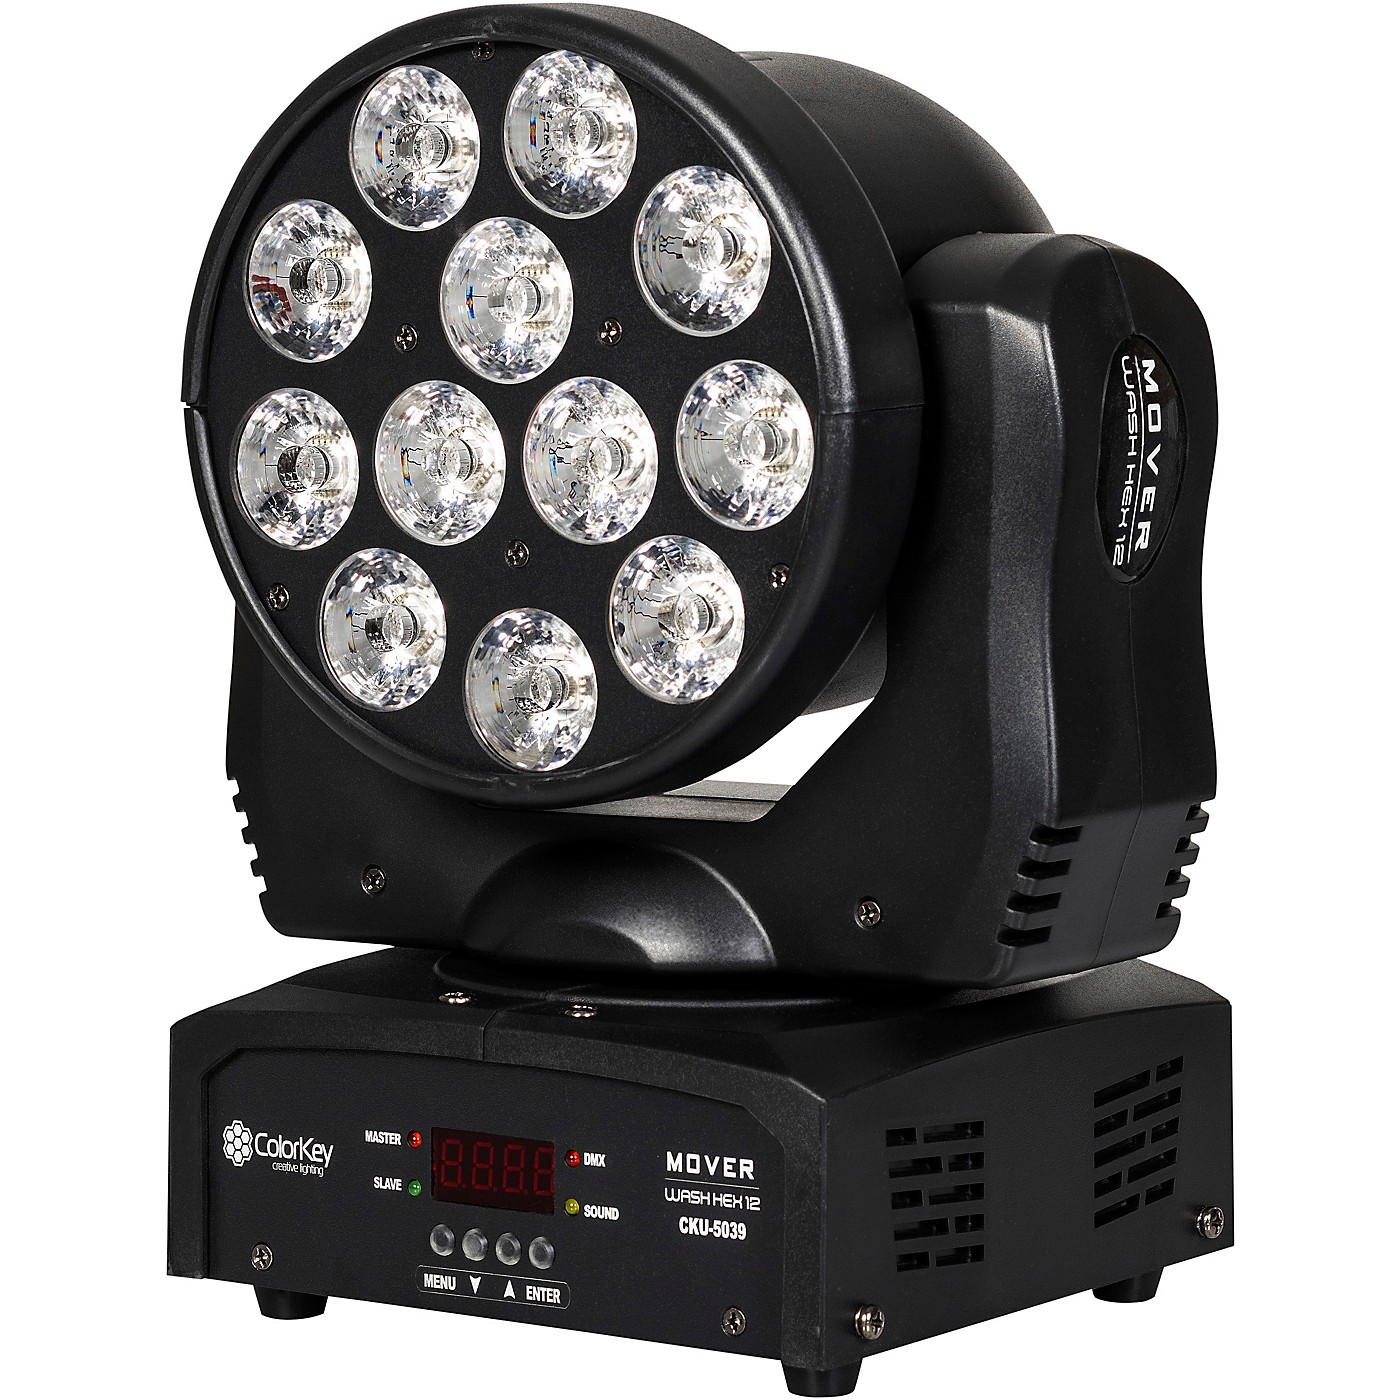 ColorKey Mover Wash HEX 12 RGBWAUV LED Moving Head Wash Light thumbnail